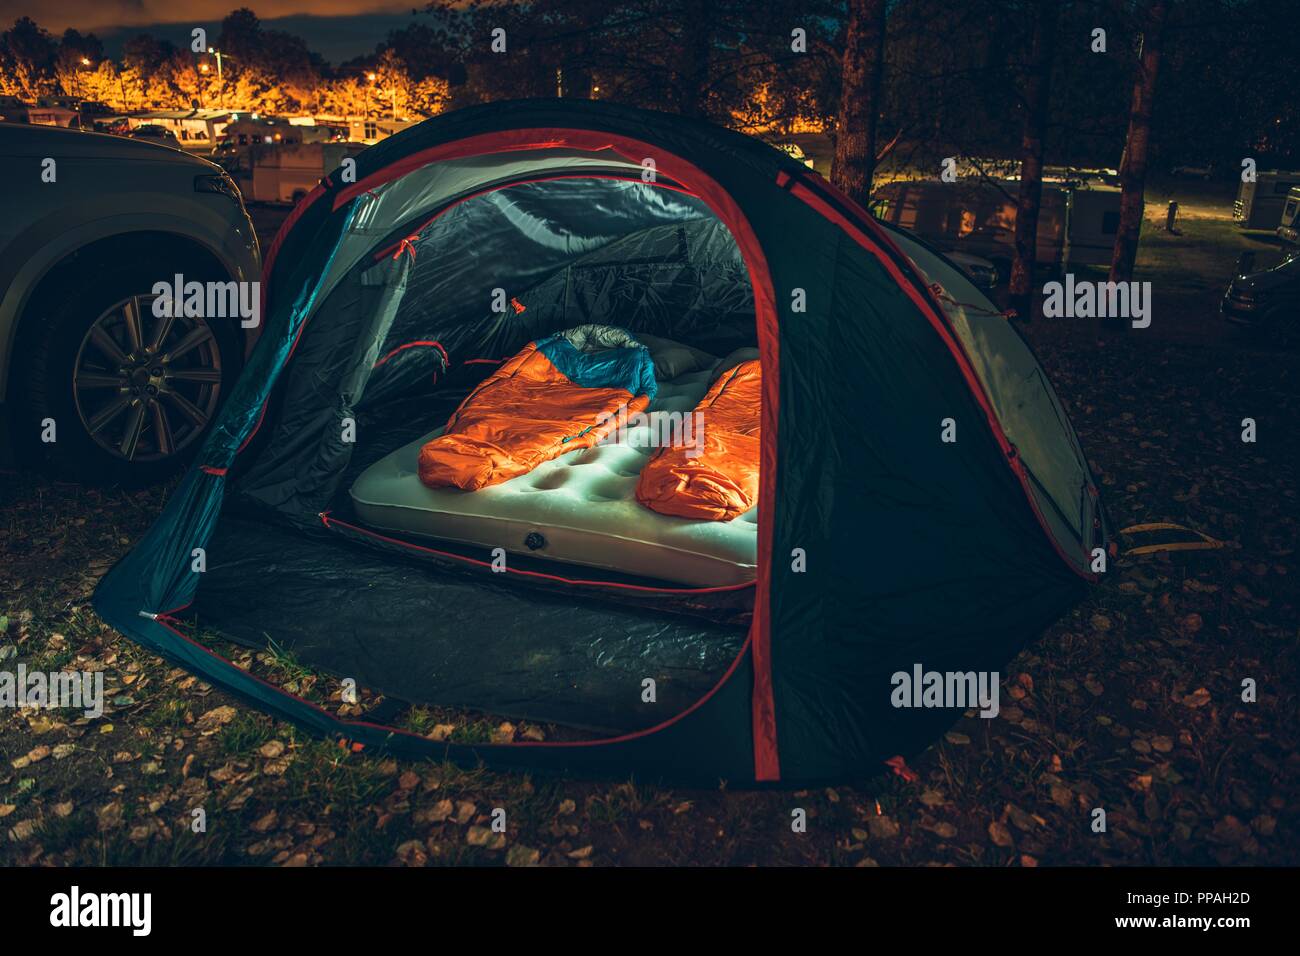 Inside Illuminated Tent on the Campsite at Night. Two Sleeping Bags Inside. Traveling with Tent Theme. Stock Photo